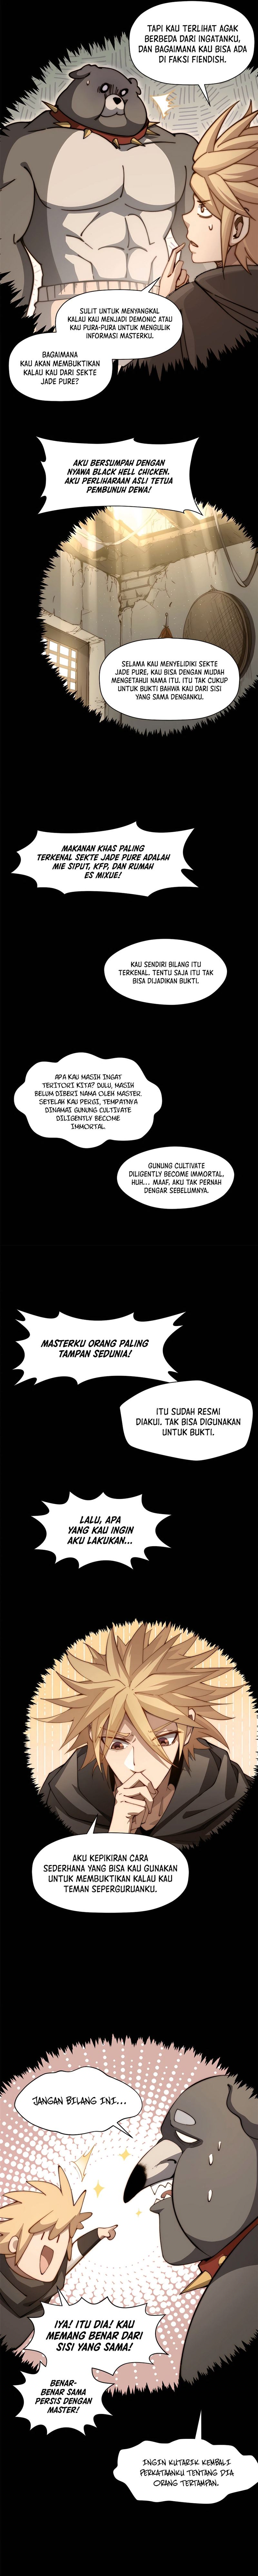 Dilarang COPAS - situs resmi www.mangacanblog.com - Komik top tier providence secretly cultivate for a thousand years 139 - chapter 139 140 Indonesia top tier providence secretly cultivate for a thousand years 139 - chapter 139 Terbaru 6|Baca Manga Komik Indonesia|Mangacan